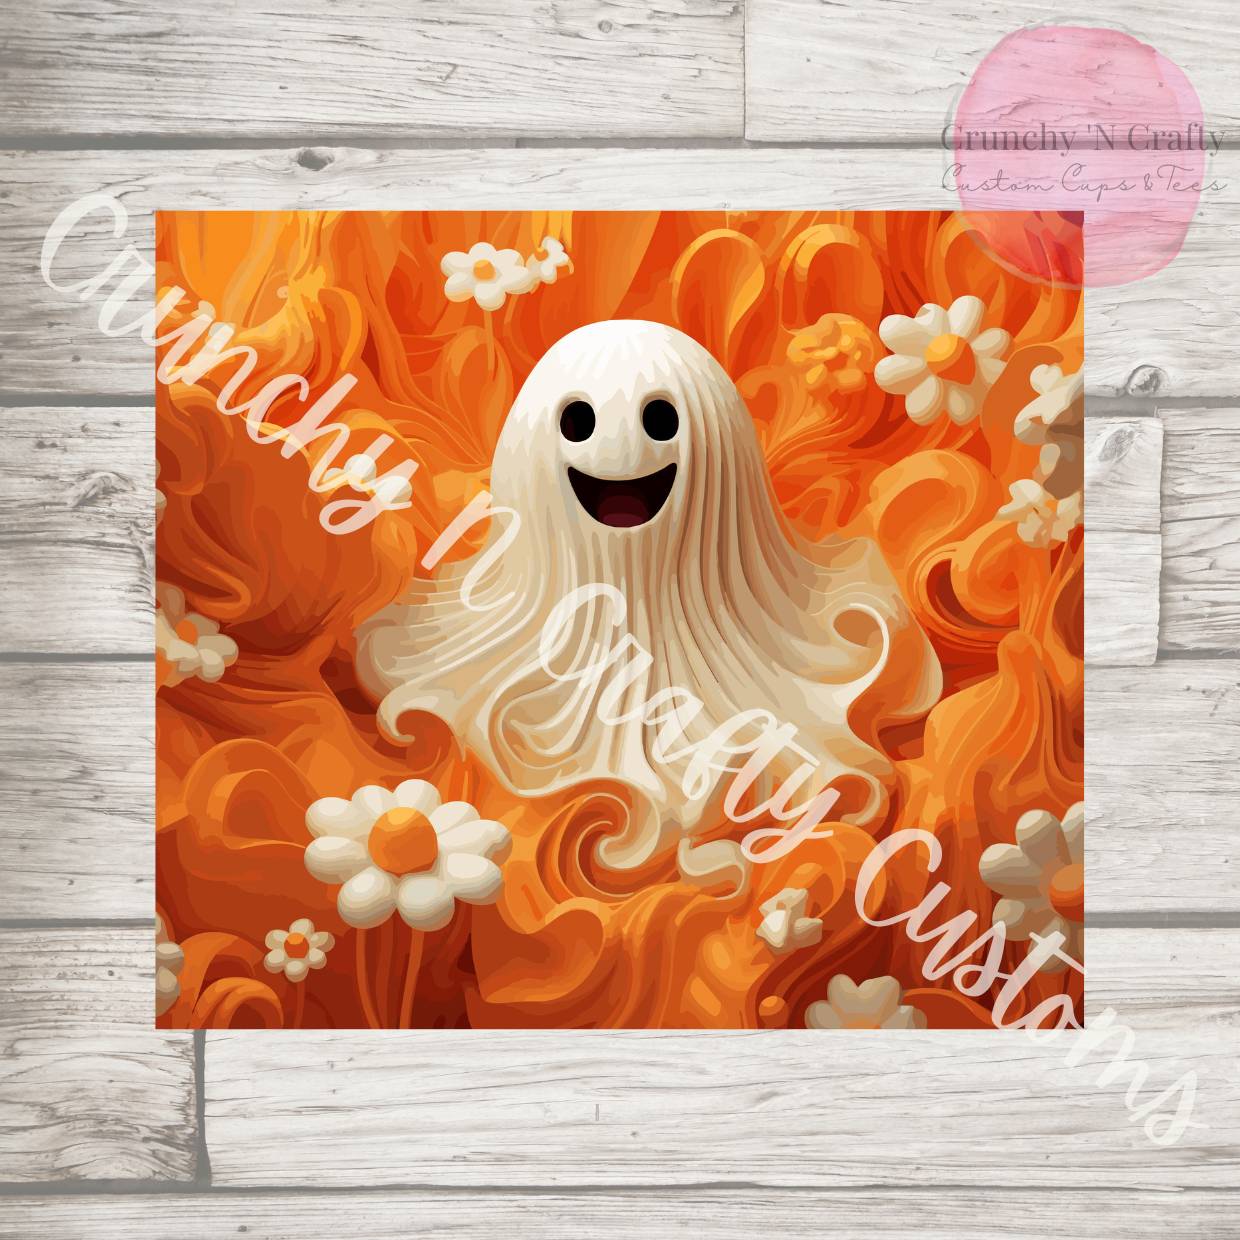 3D Cute ghost with flowers and orange background 20 ounce tumbler cup